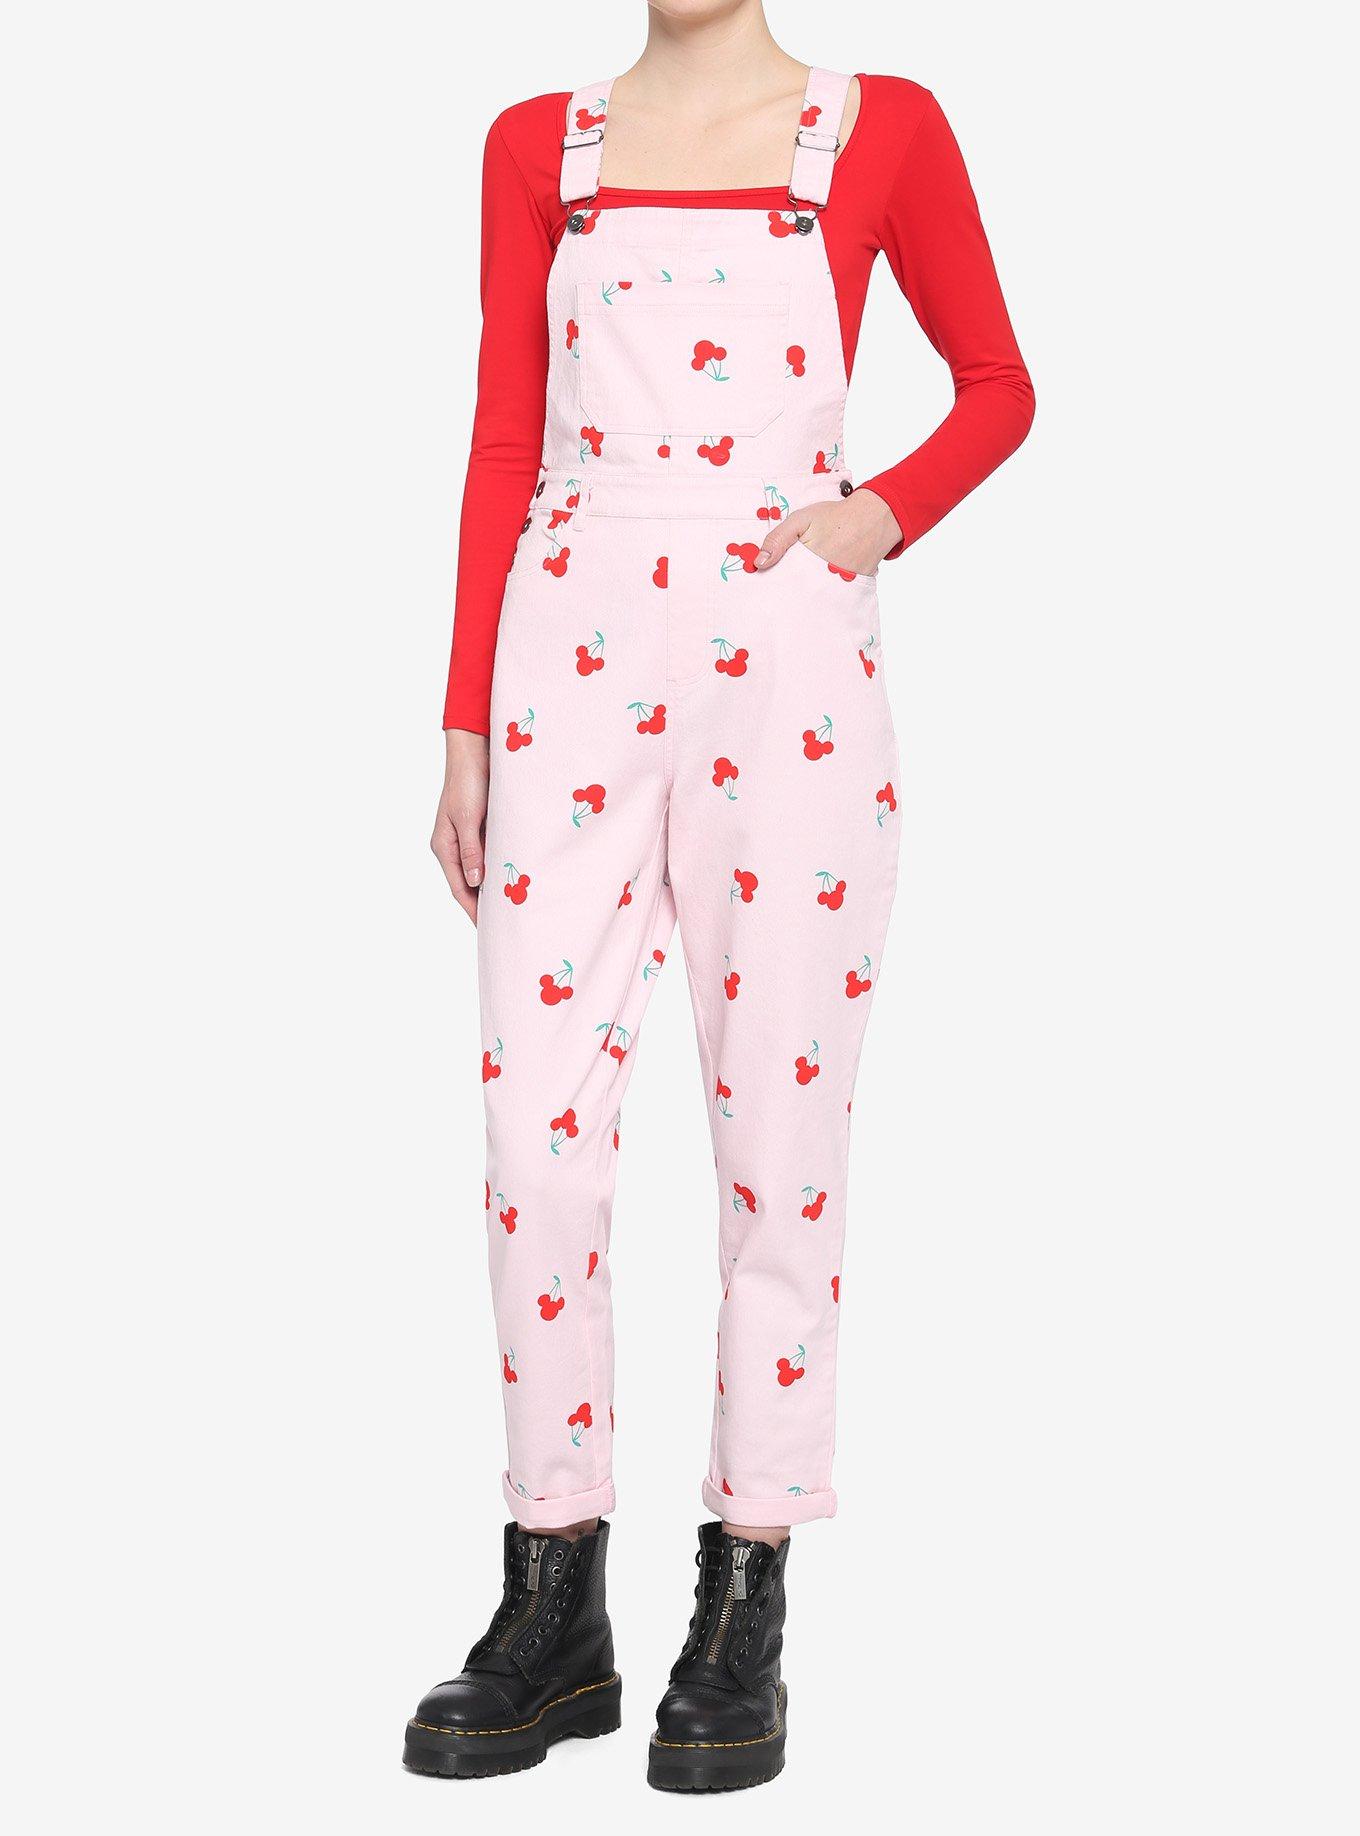 Let's Talk About Minnie Mouse and her New Pantsuit